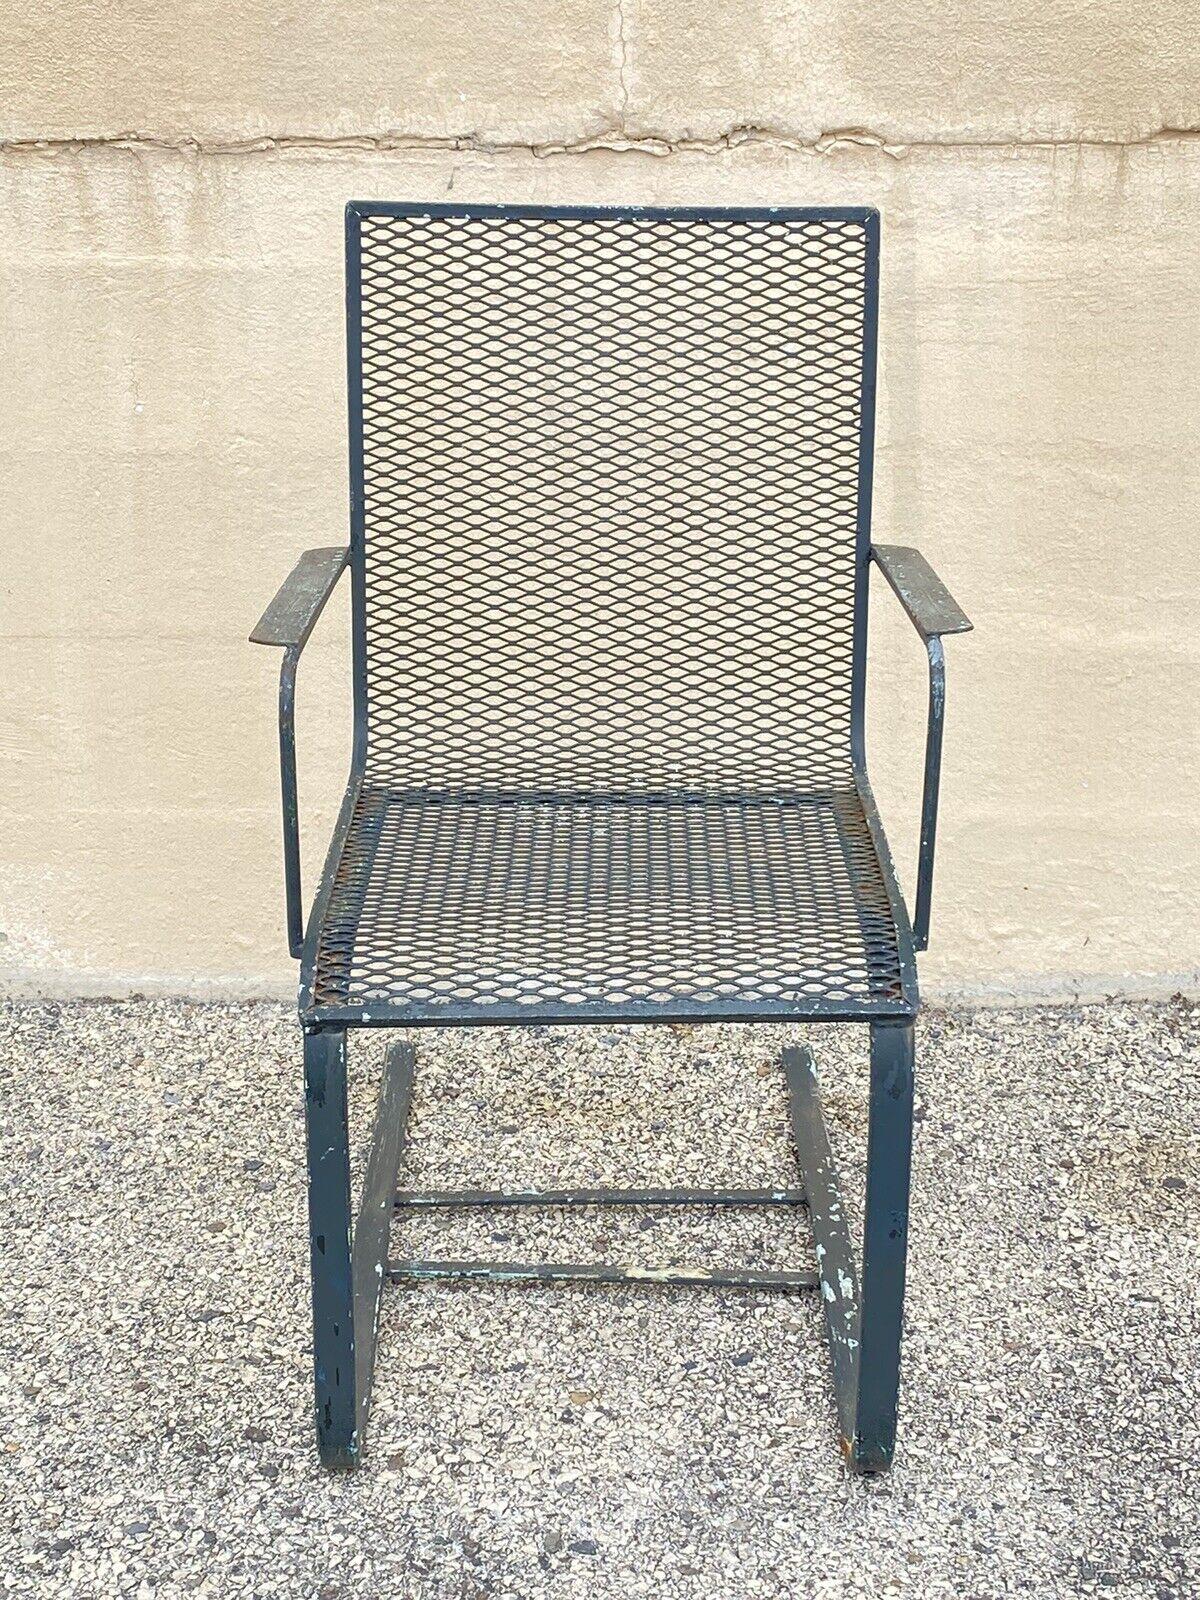 Vintage Industrial Modern Green Wrought Iron Metal Mesh Cantilever Garden Patio Chair. Circa Mid 20th Century. Dimensions : 35,5